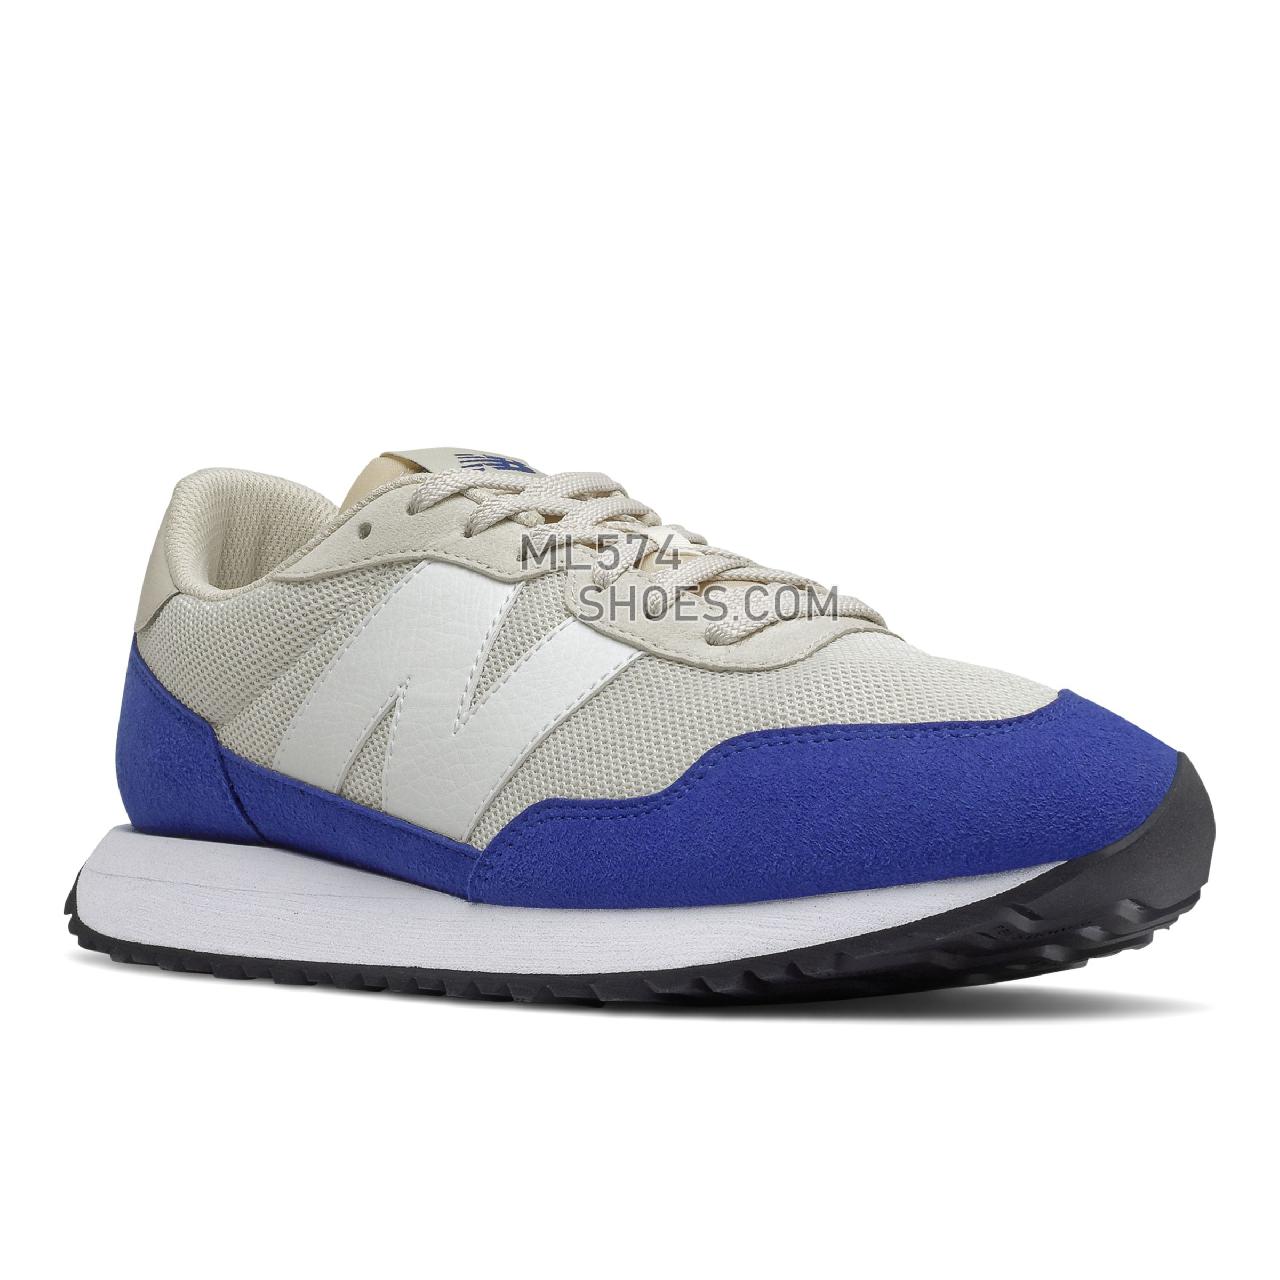 New Balance 237 - Men's Sport Style Sneakers - Moonbeam with Team Royal - MS237PL1